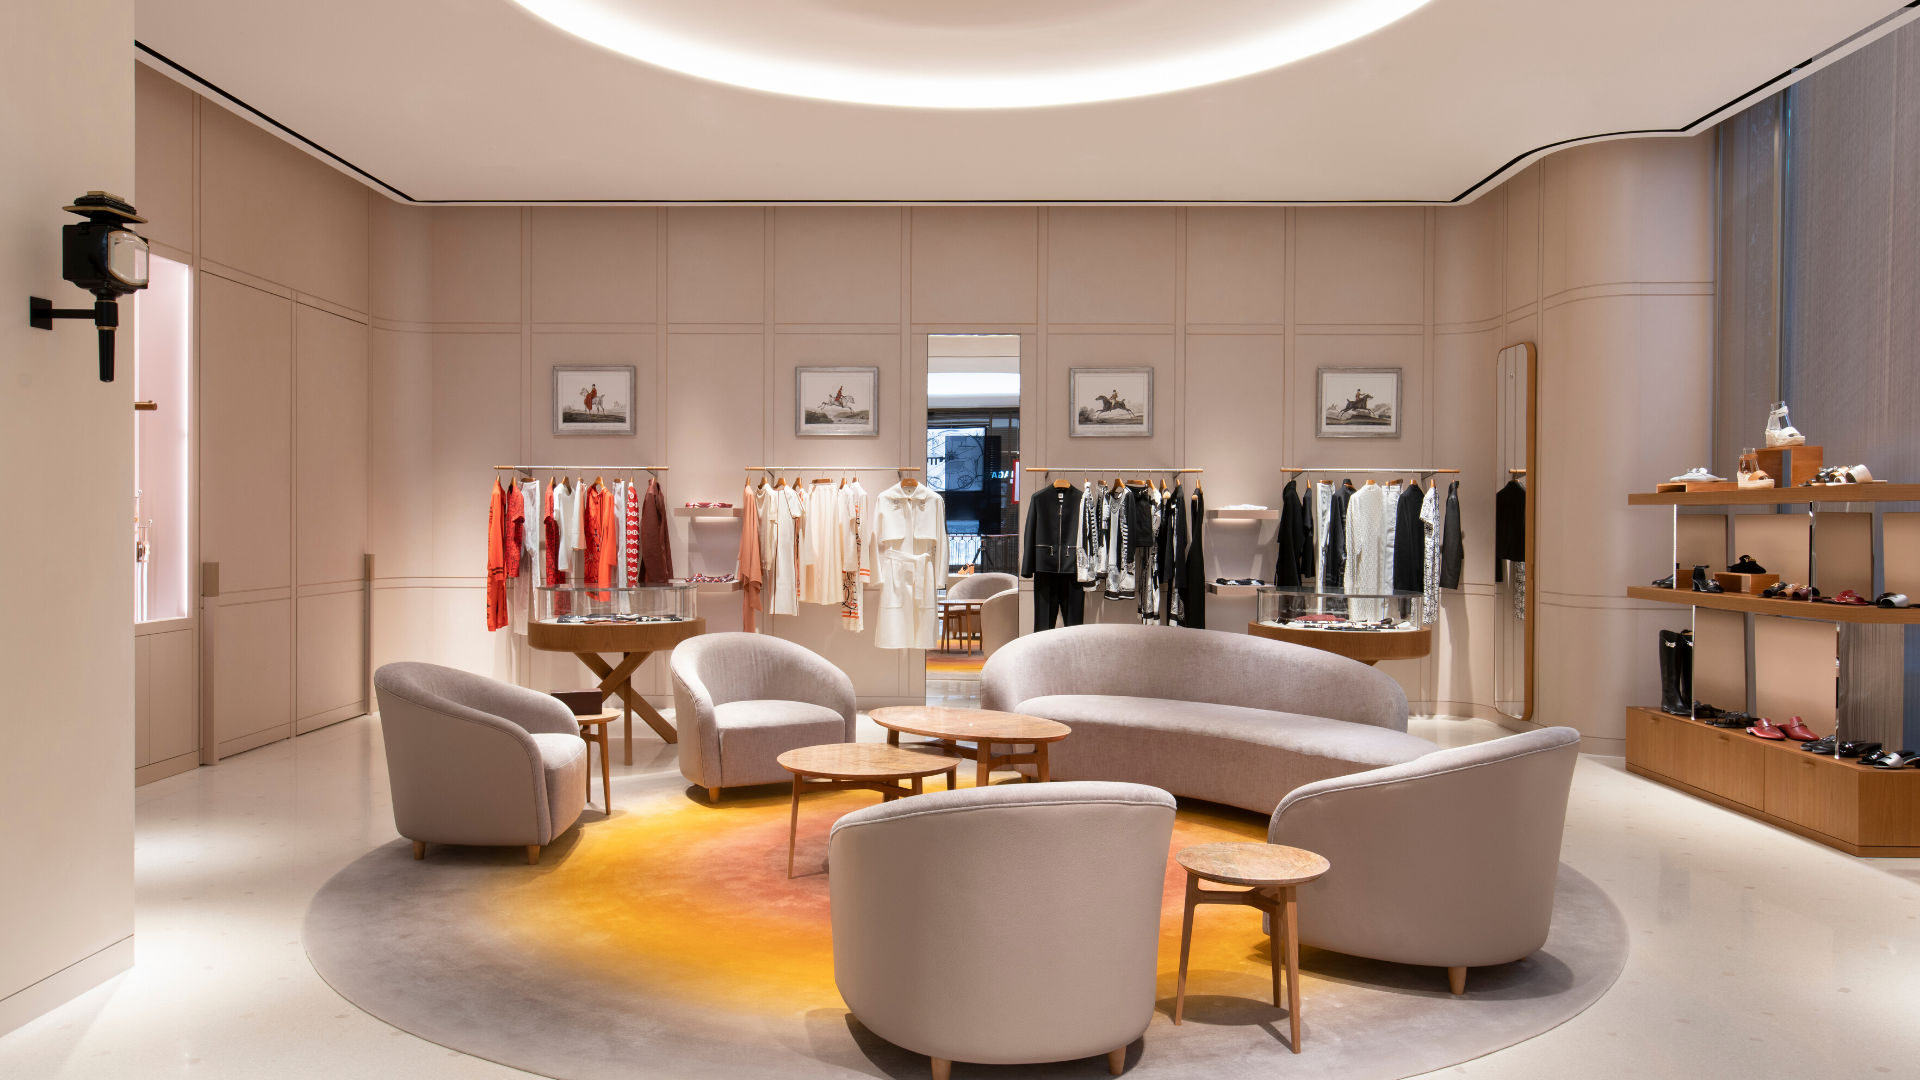 Hermès reopens in Kuwait with a store as luxurious as the brand